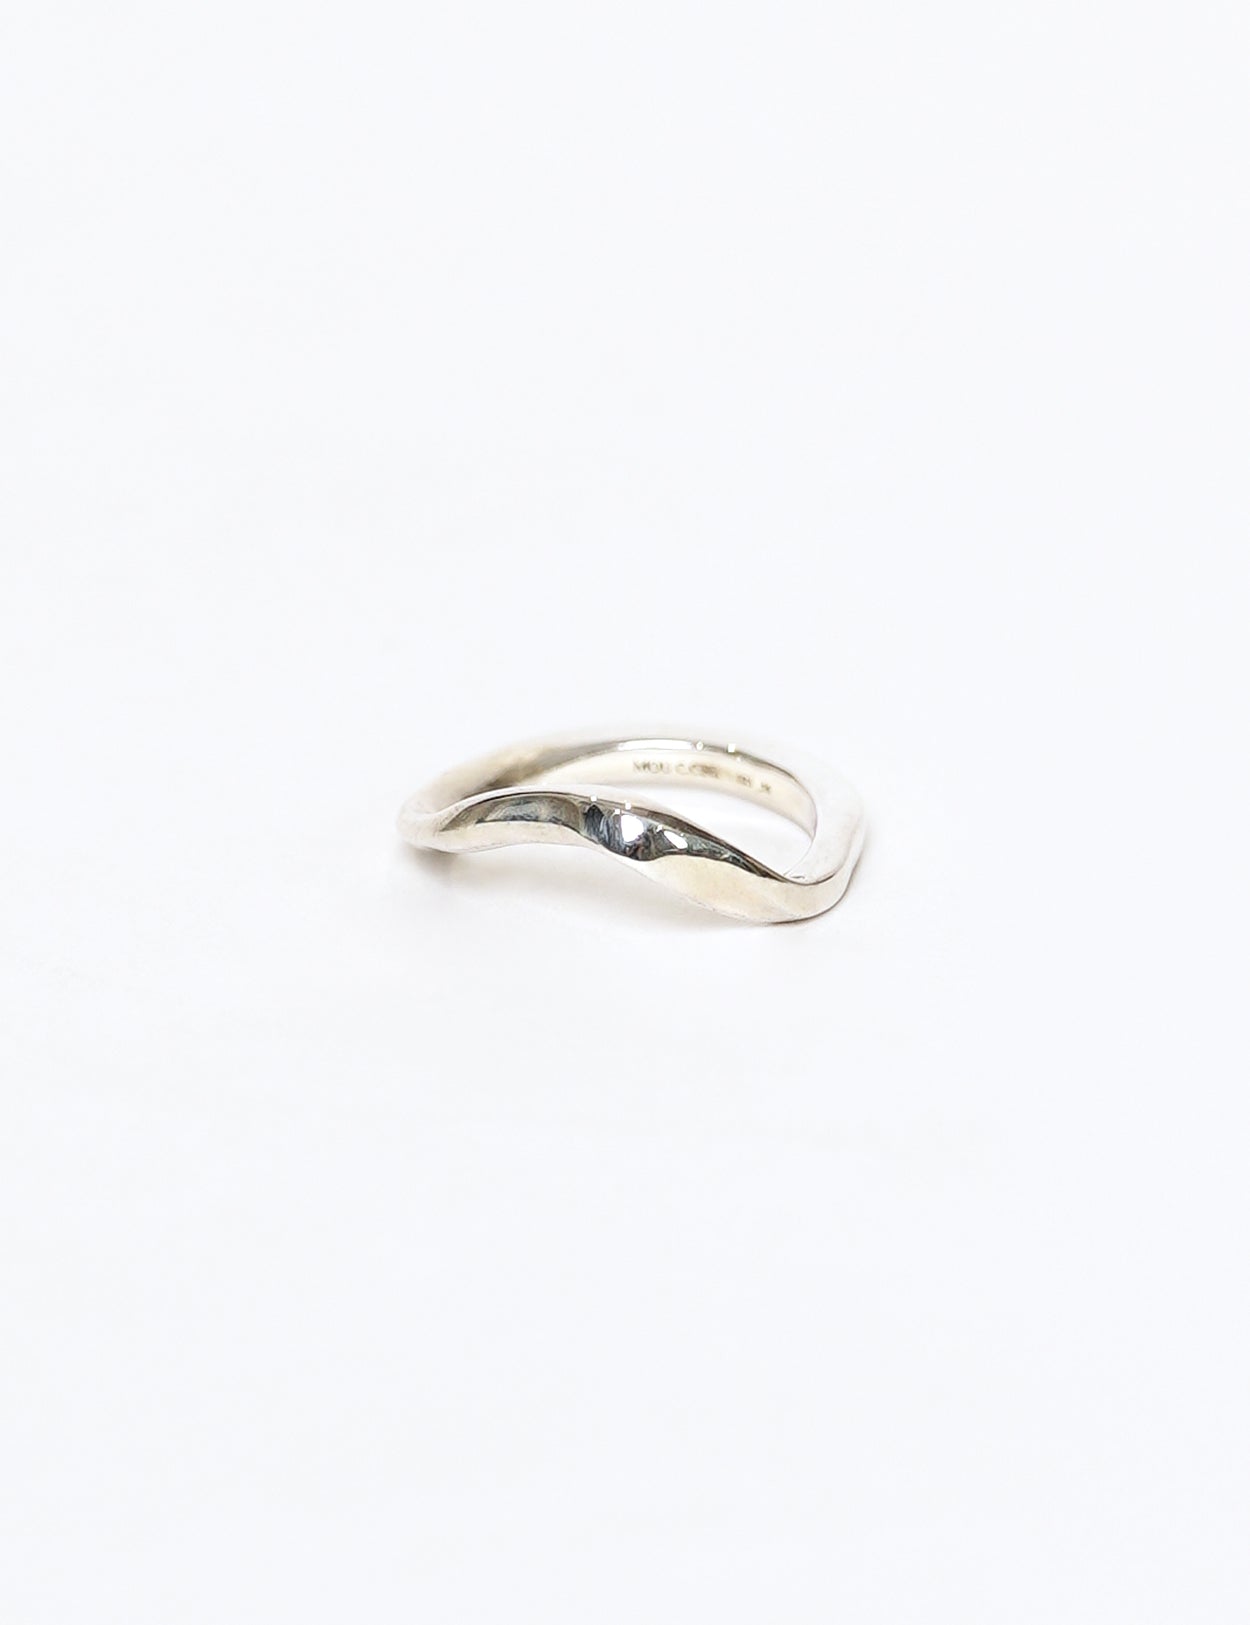 SILVER HAMMER-CRAFTED SQUARE TUBE RING A